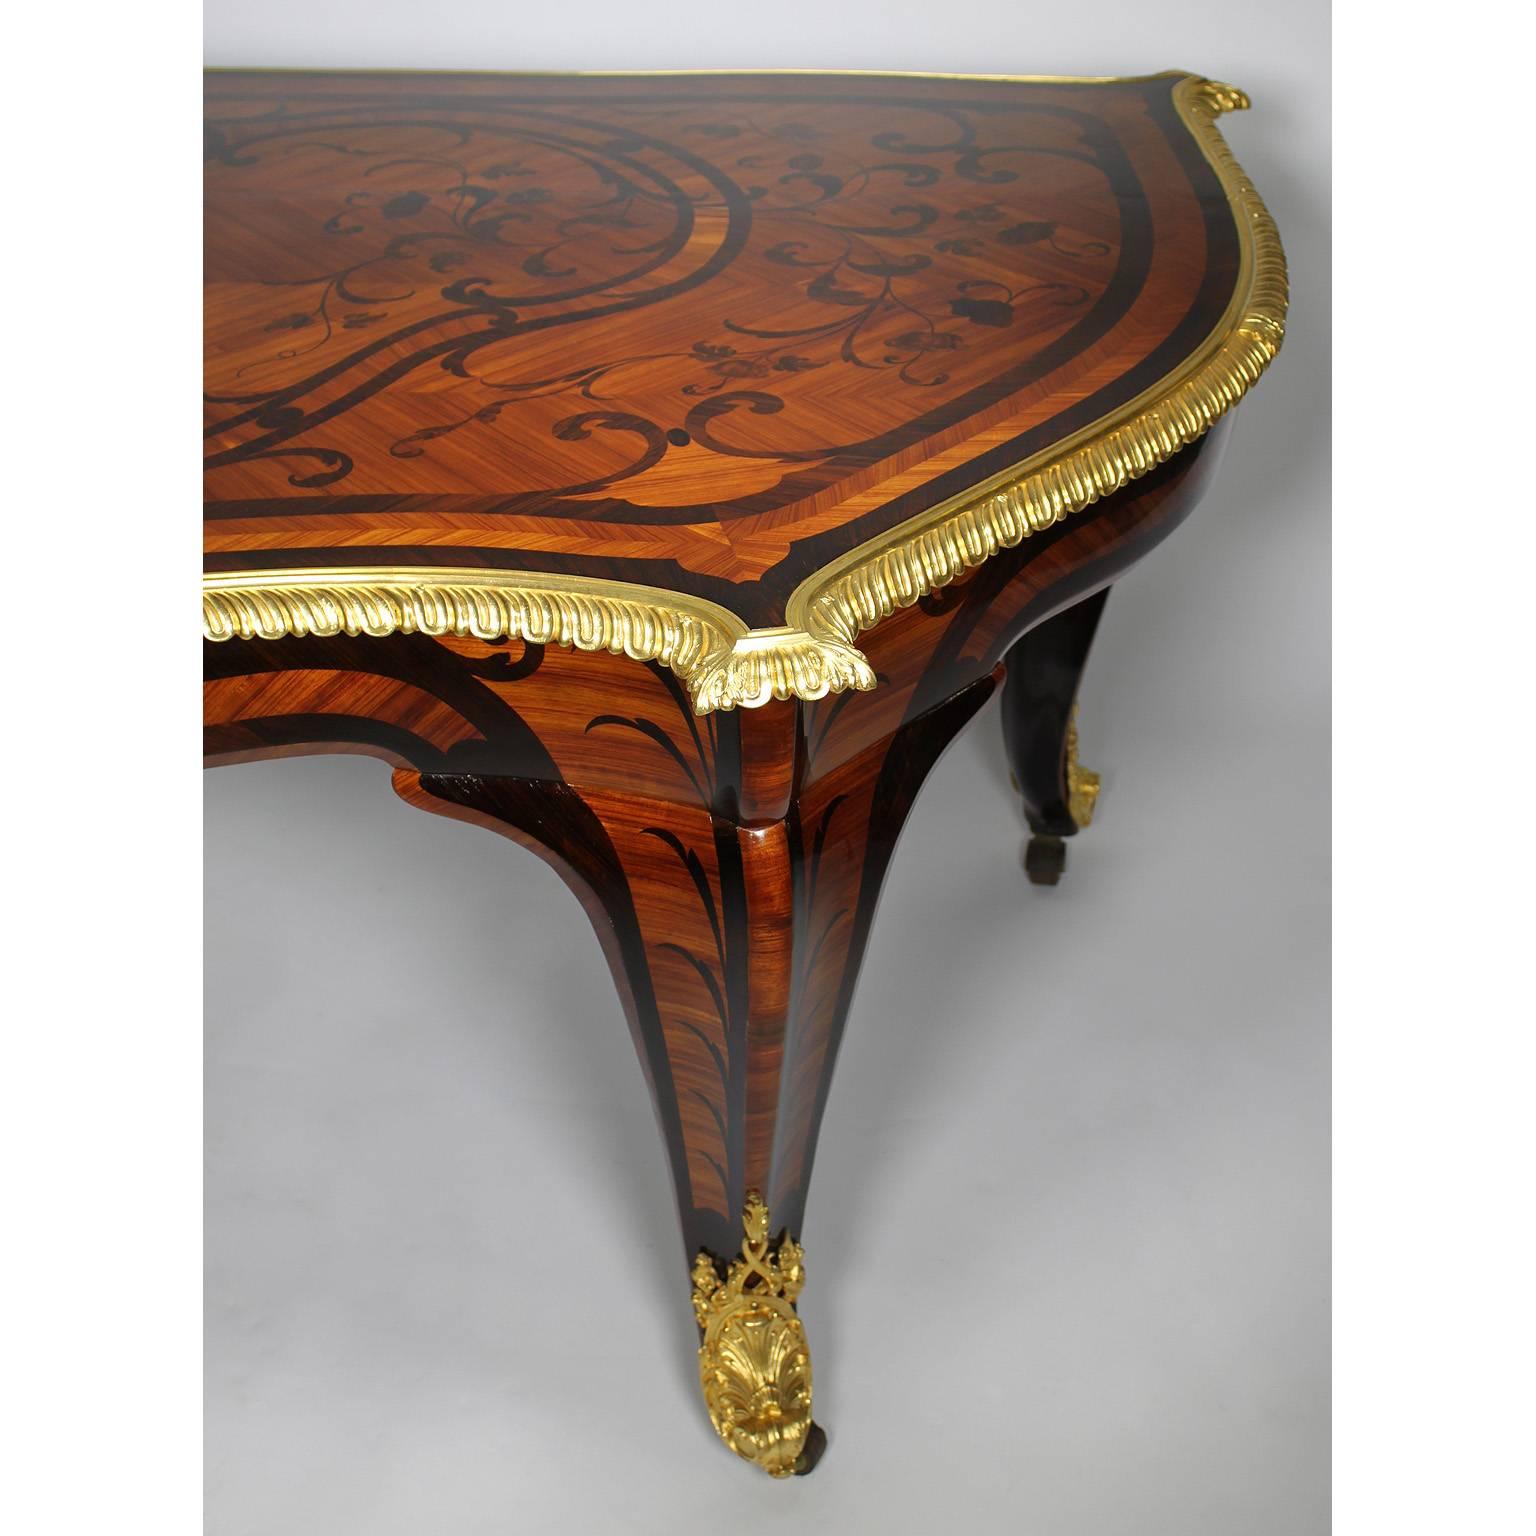 French 19th Century Louis XV Style Kingwood Marquetry Ormolu-Mounted Desk Table For Sale 3